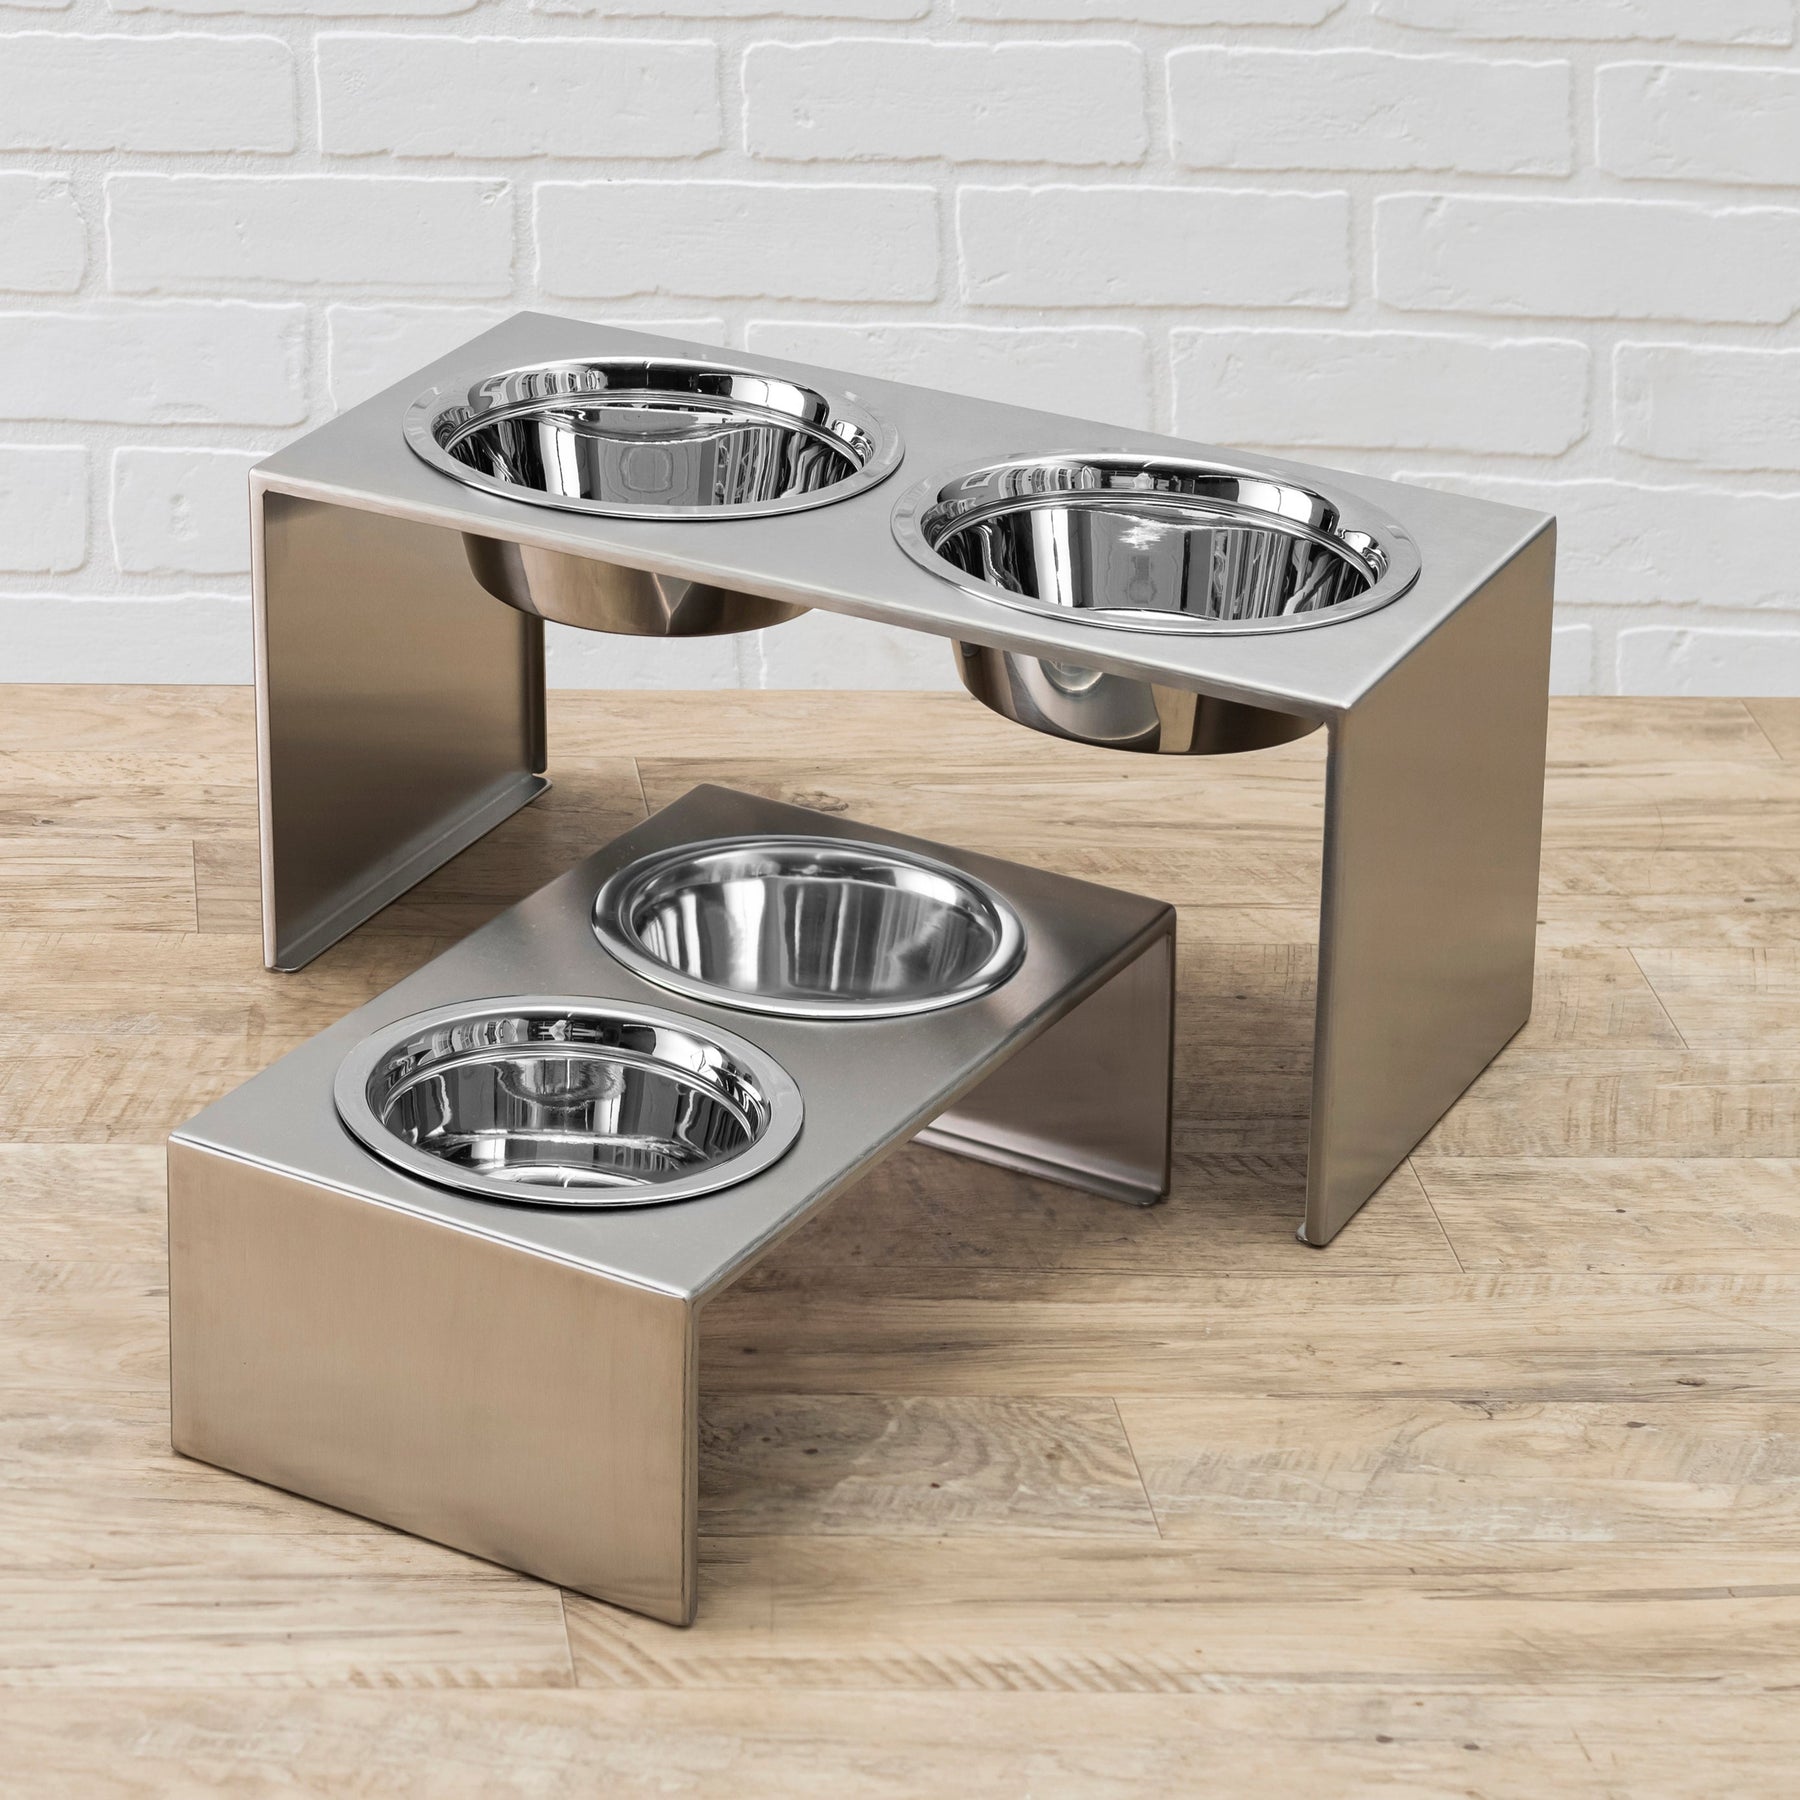 Elevated Double Stainless Steel Bowl with 5 Height Adjustable Raised Stand  Dog Bowl, Various Color – Petzo